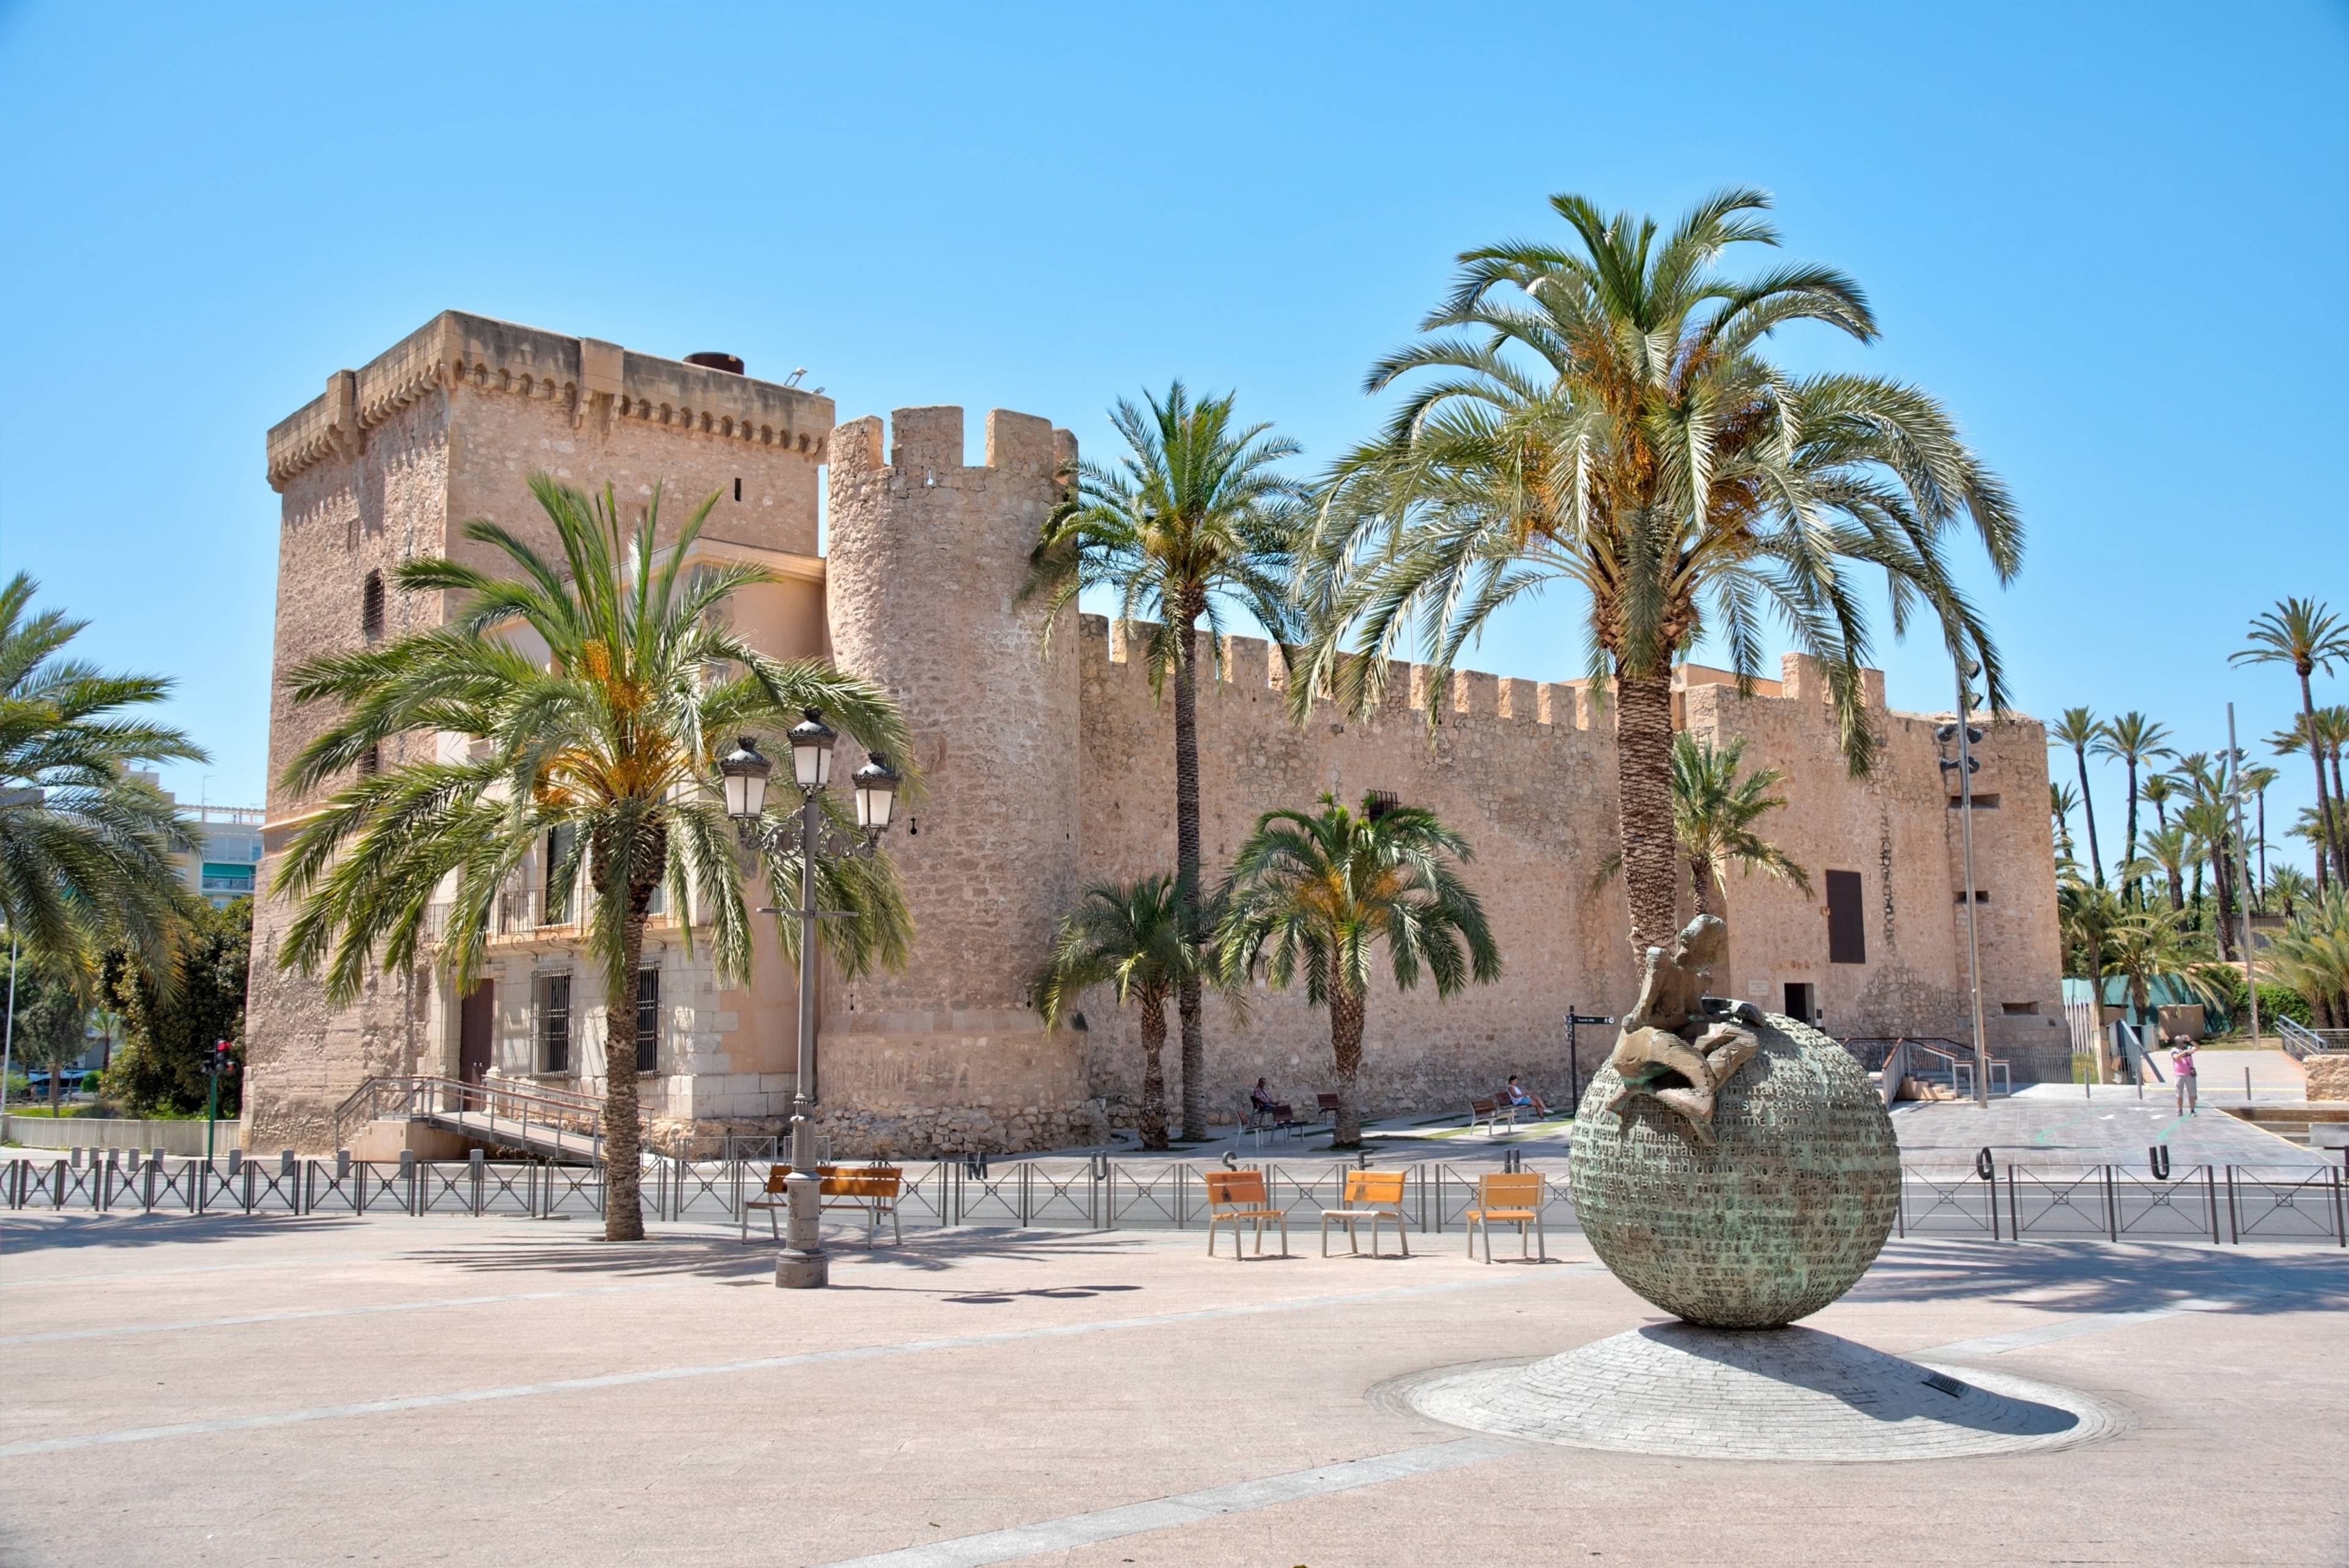 Archaeological and History Museum of Elche (MAHE)